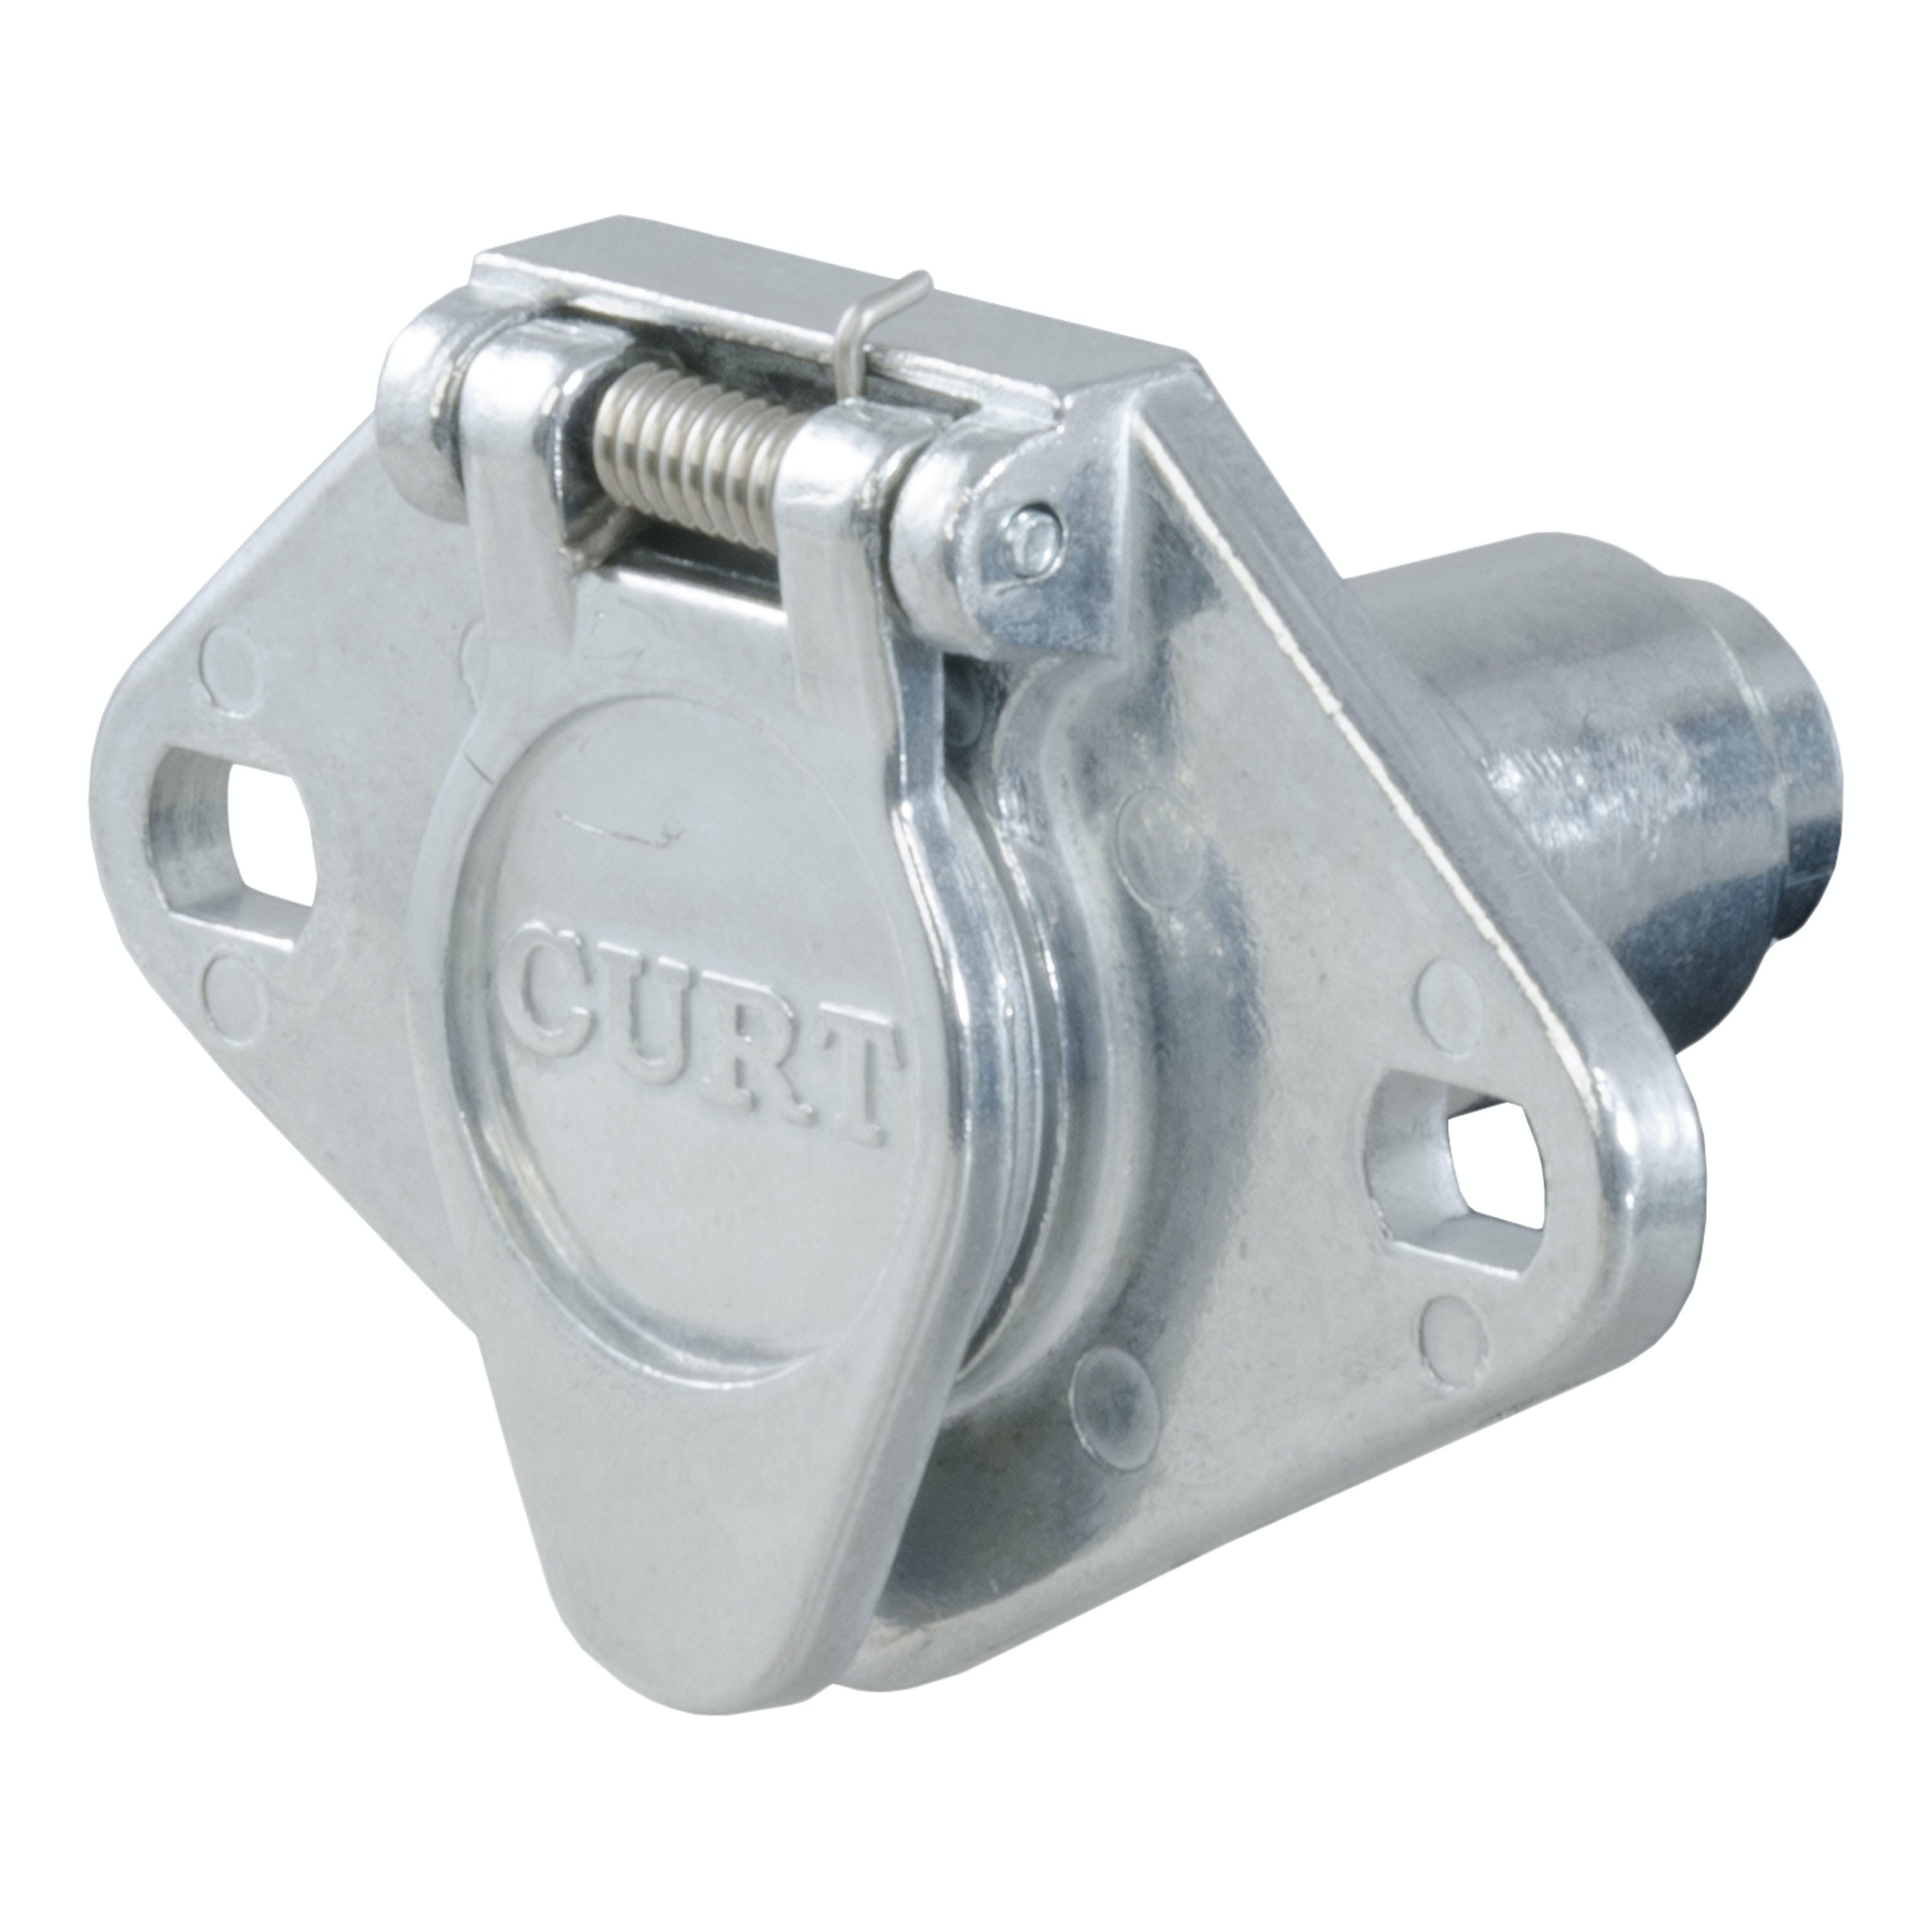 CURT 58071 4-Way Round Connector Socket (Vehicle Side, Packaged)